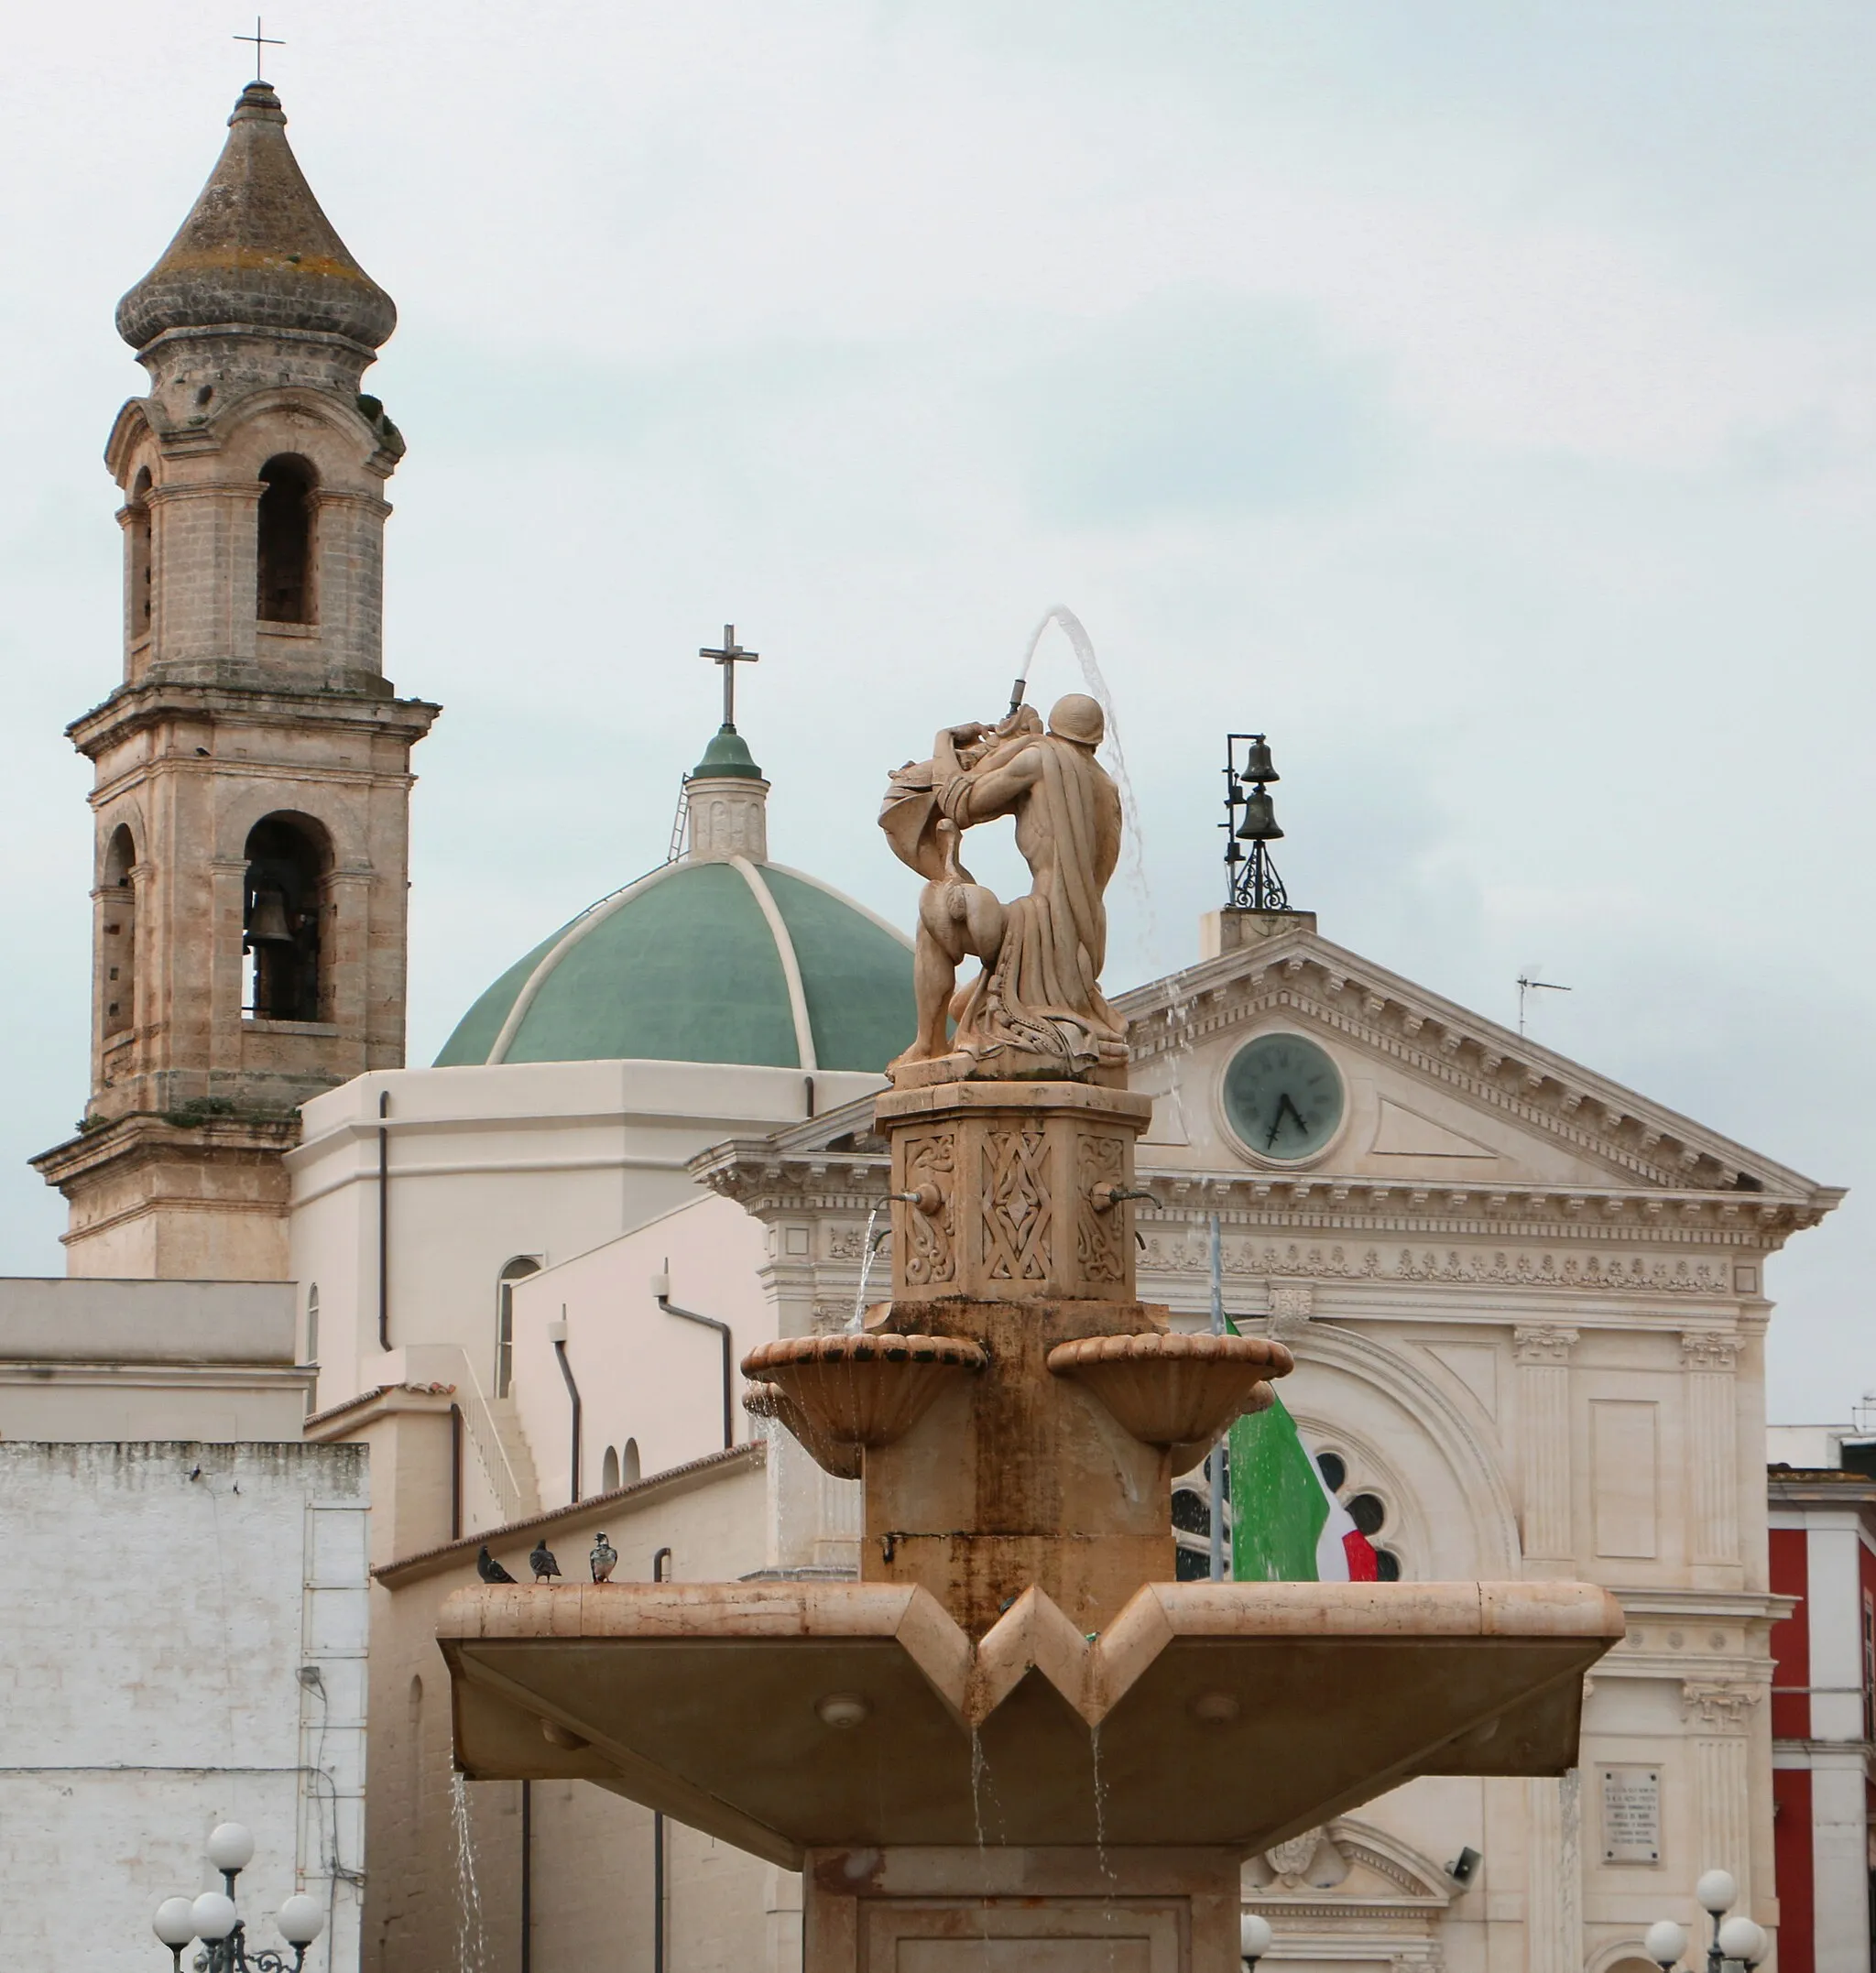 Photo showing: The center of Mola di Bari is considered Piazza XX Settembre, best represented by the Monumental Fountain, known as "bath" and the Church of the Magdalene